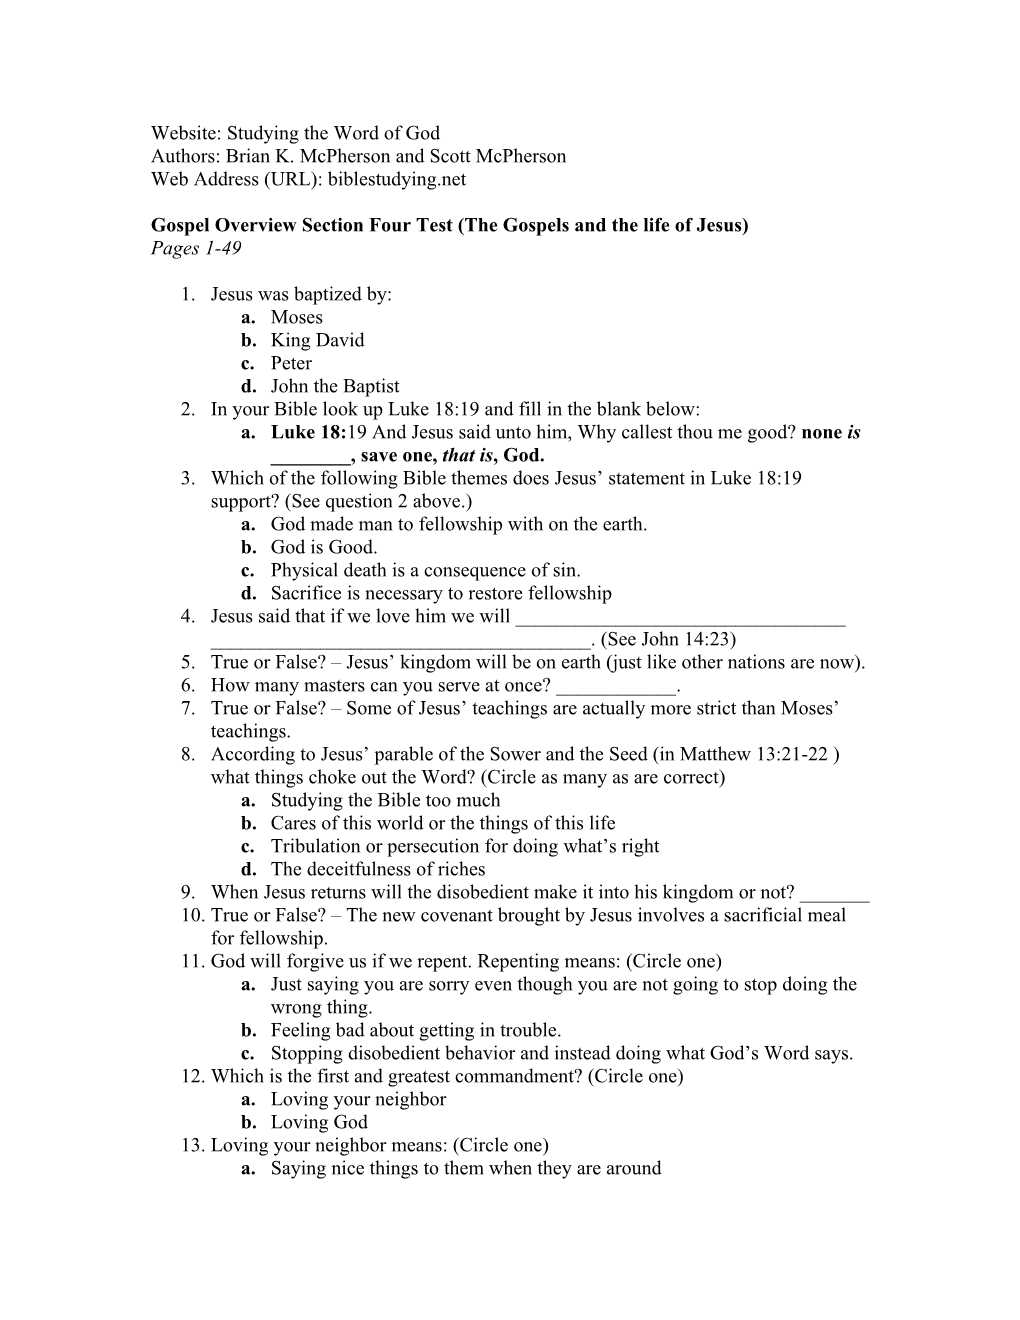 Gospel Overview Section Four Test (Jesus & the Apostles)